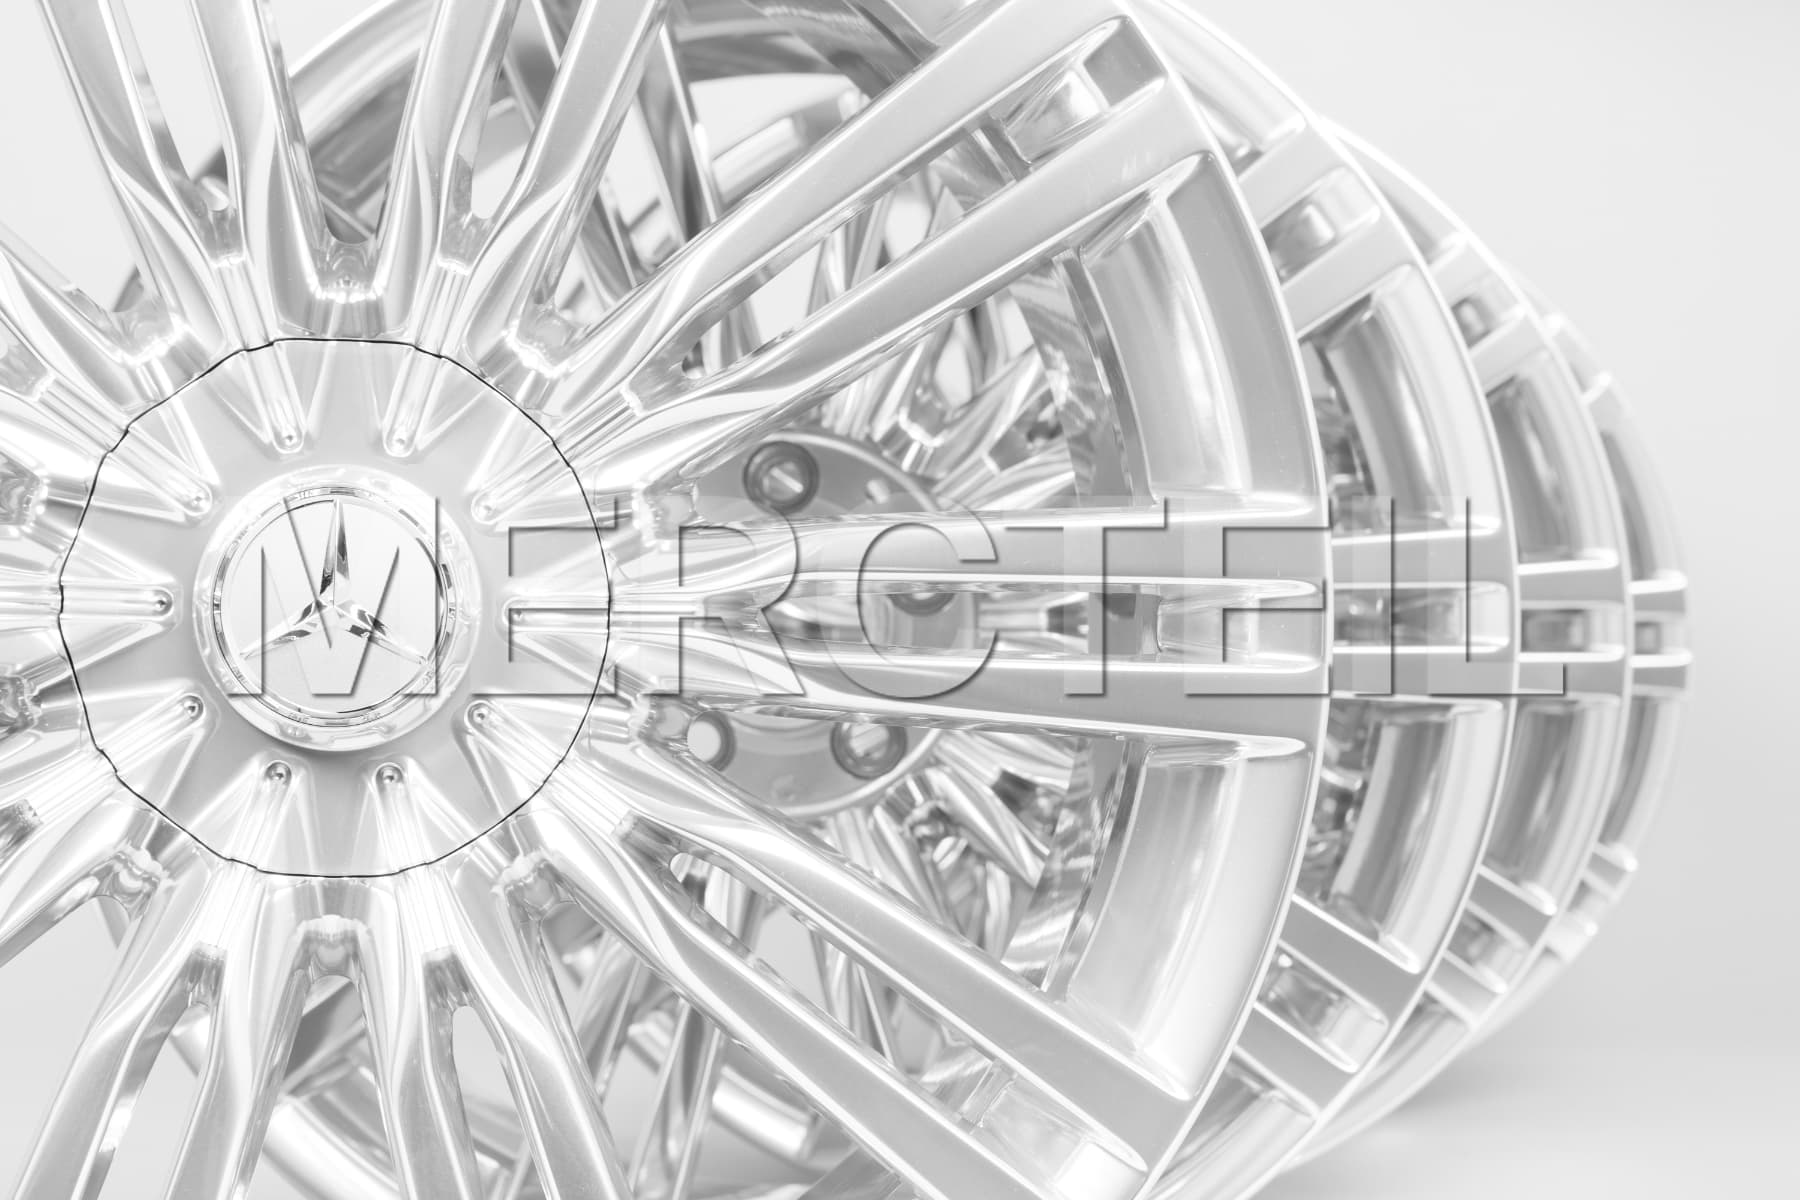 10 Double Spokes Silver Forged Rims S Class 20 Inch W223 Genuine Mercedes Benz (Part number: A22340141007X15)